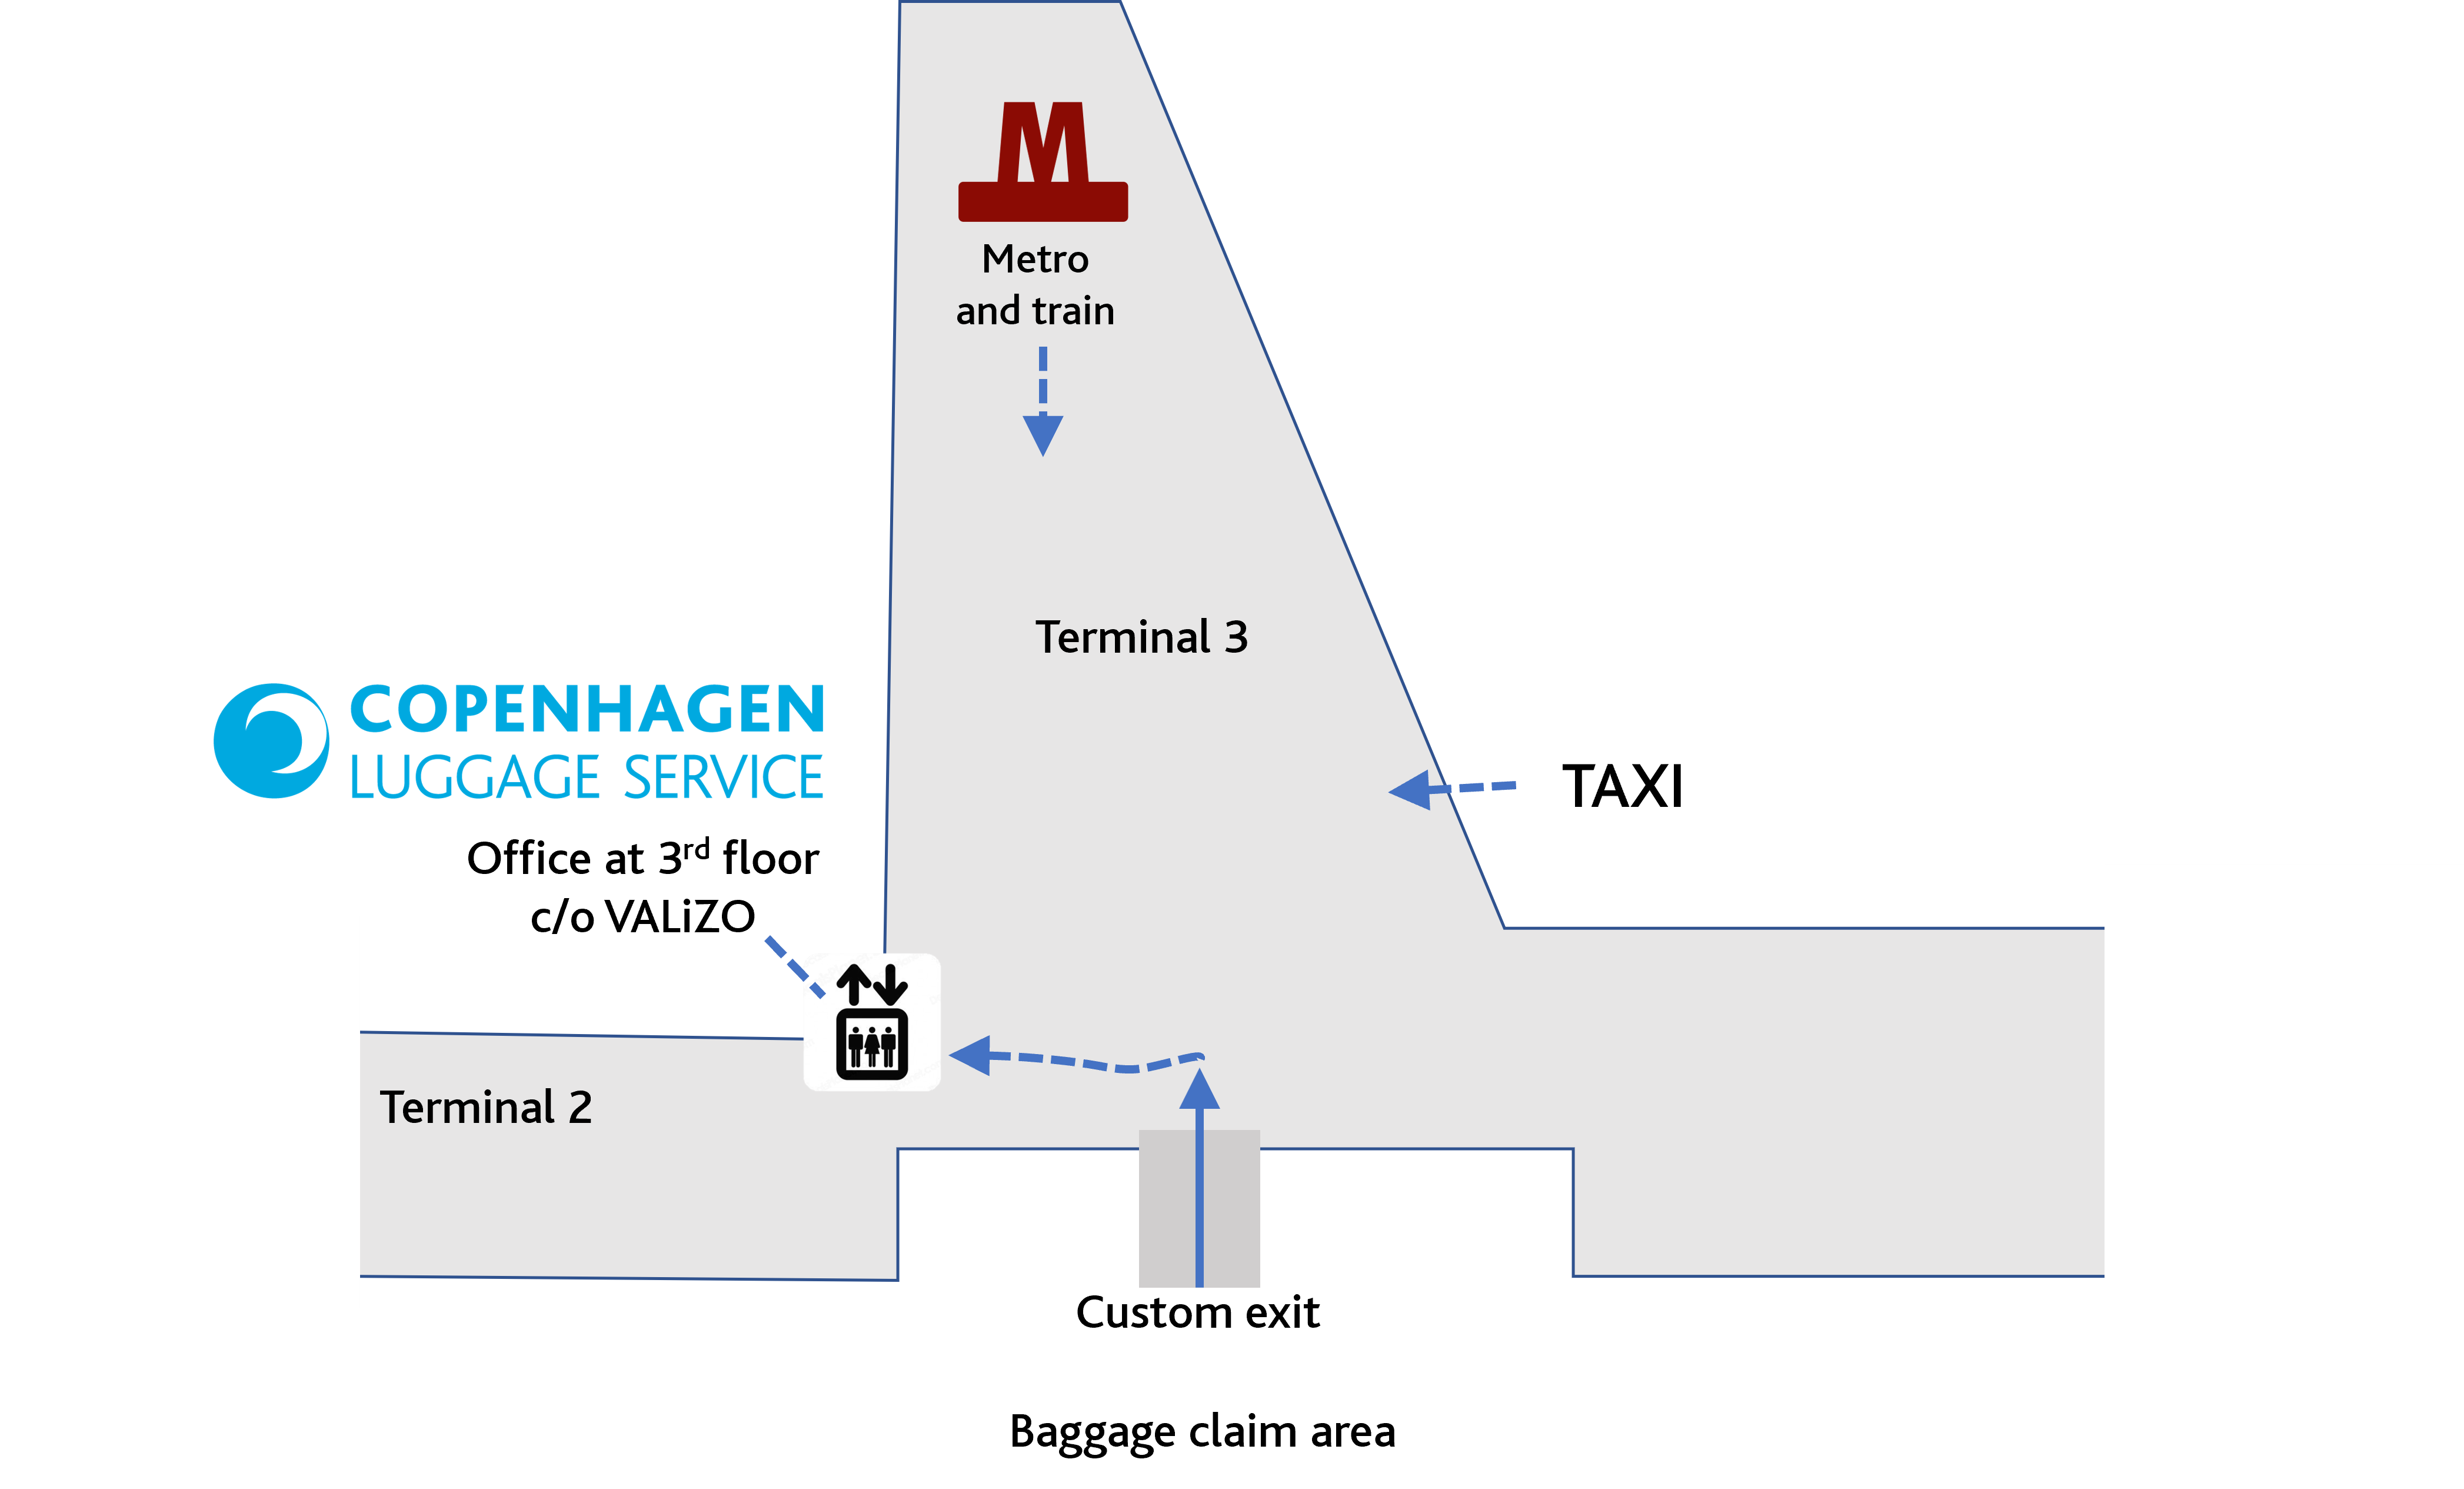 CPH Luggage Service office location